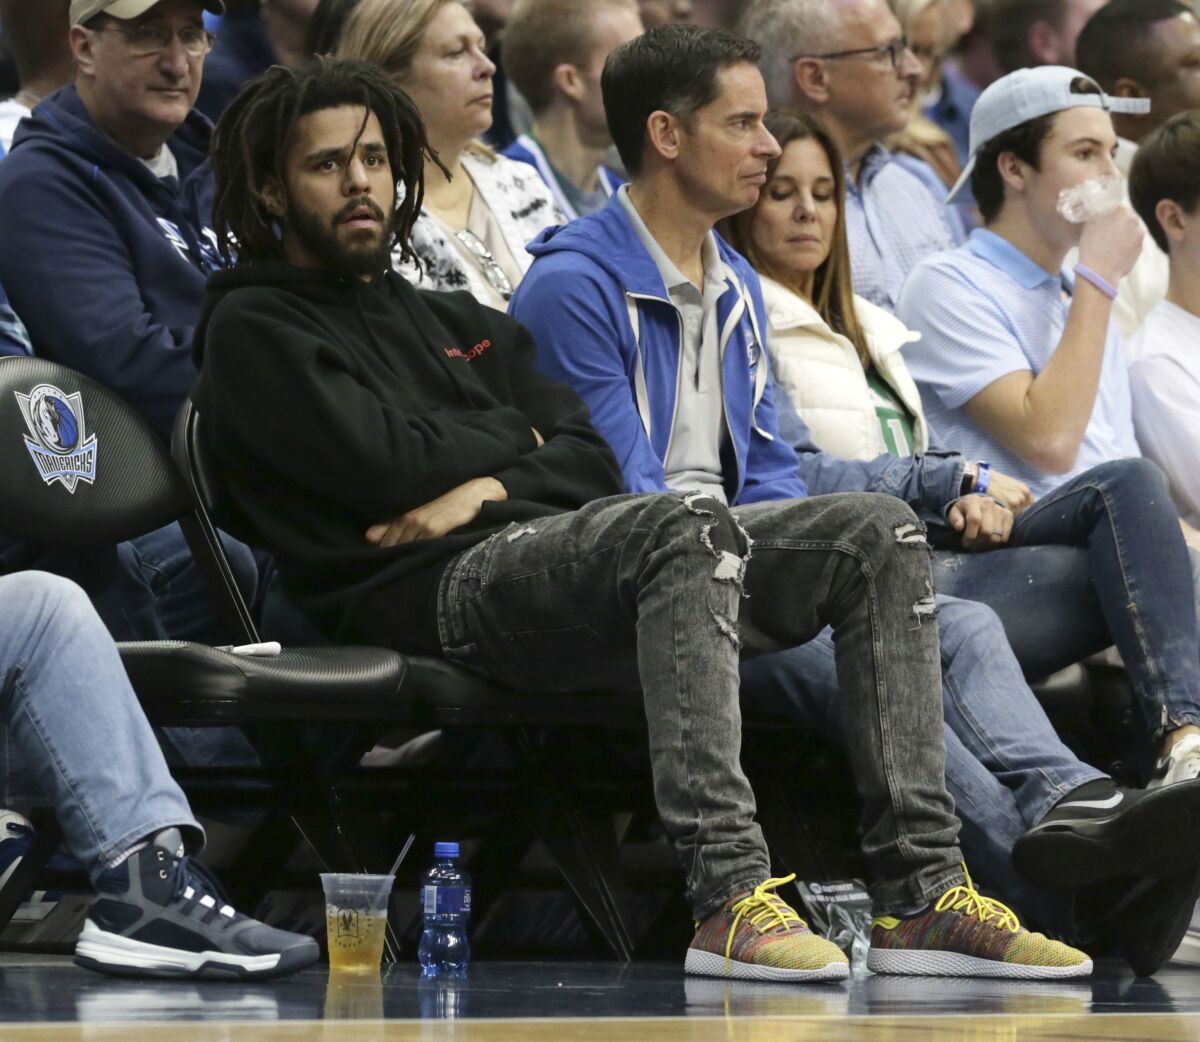 J. Cole sits courtside and watches an NBA basketball game between the Detroit Pistons and Dallas Mavericks in Dallas.